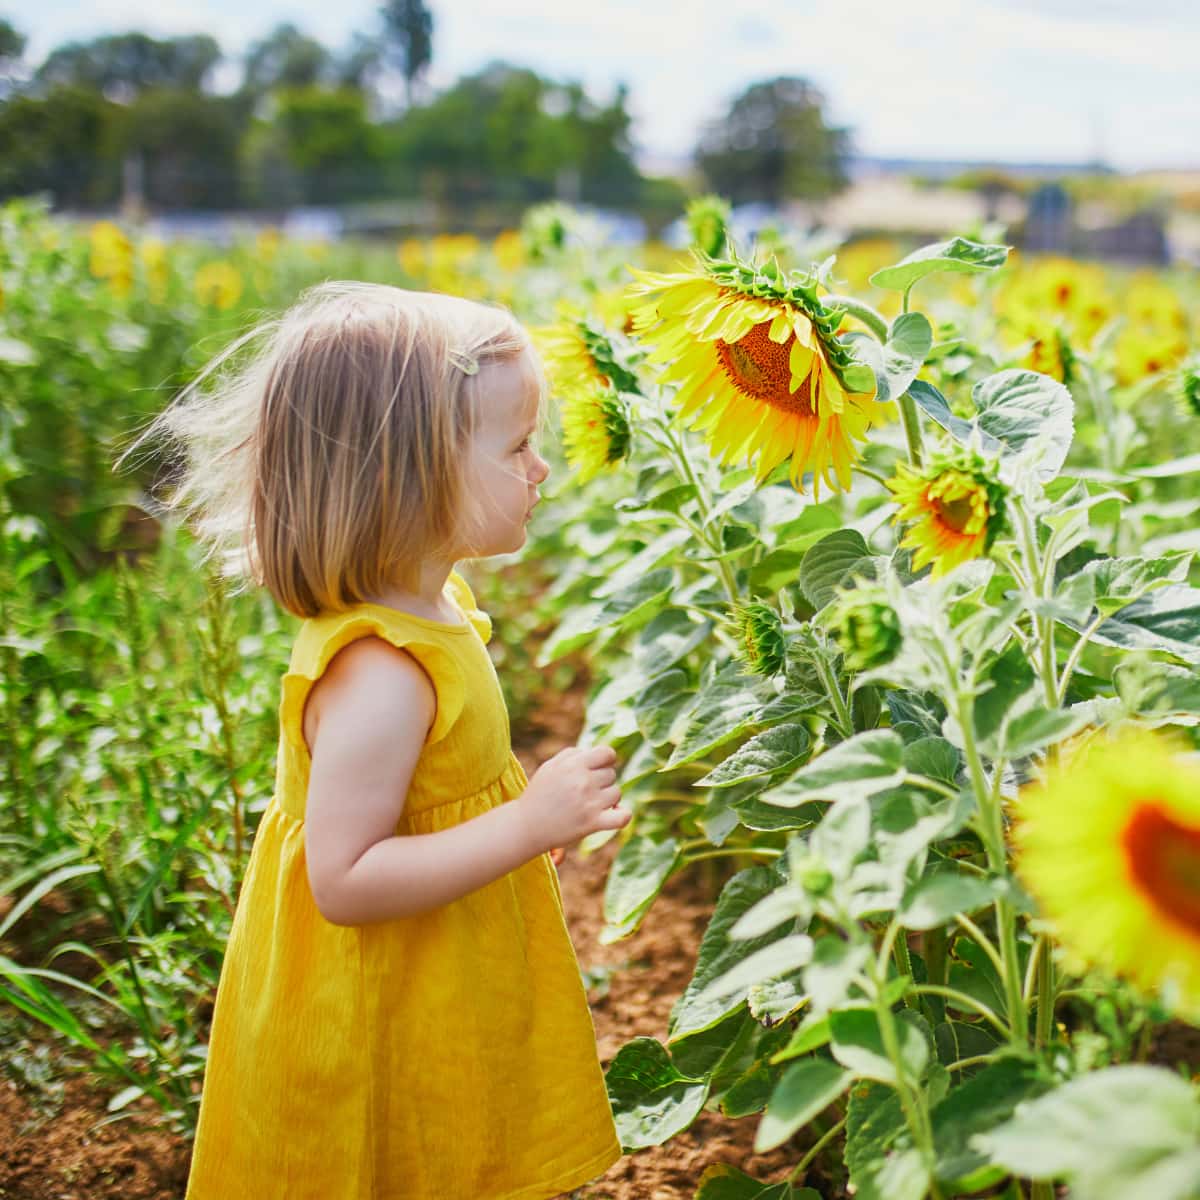 Young girl standing in sunflower field.